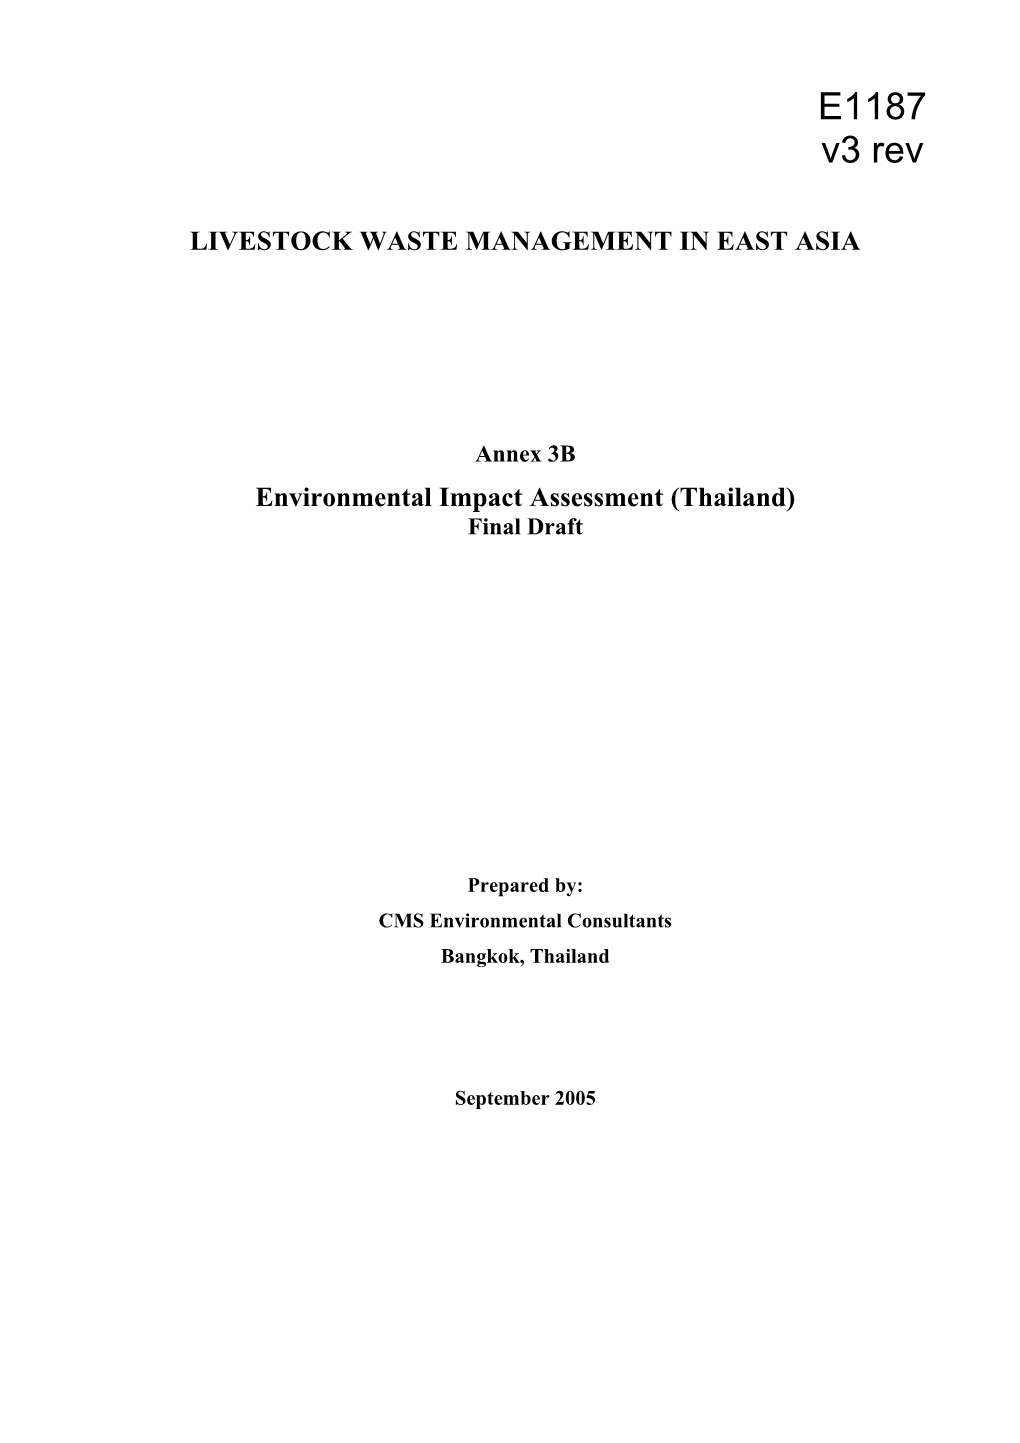 Livestock Waste Management in East Asia